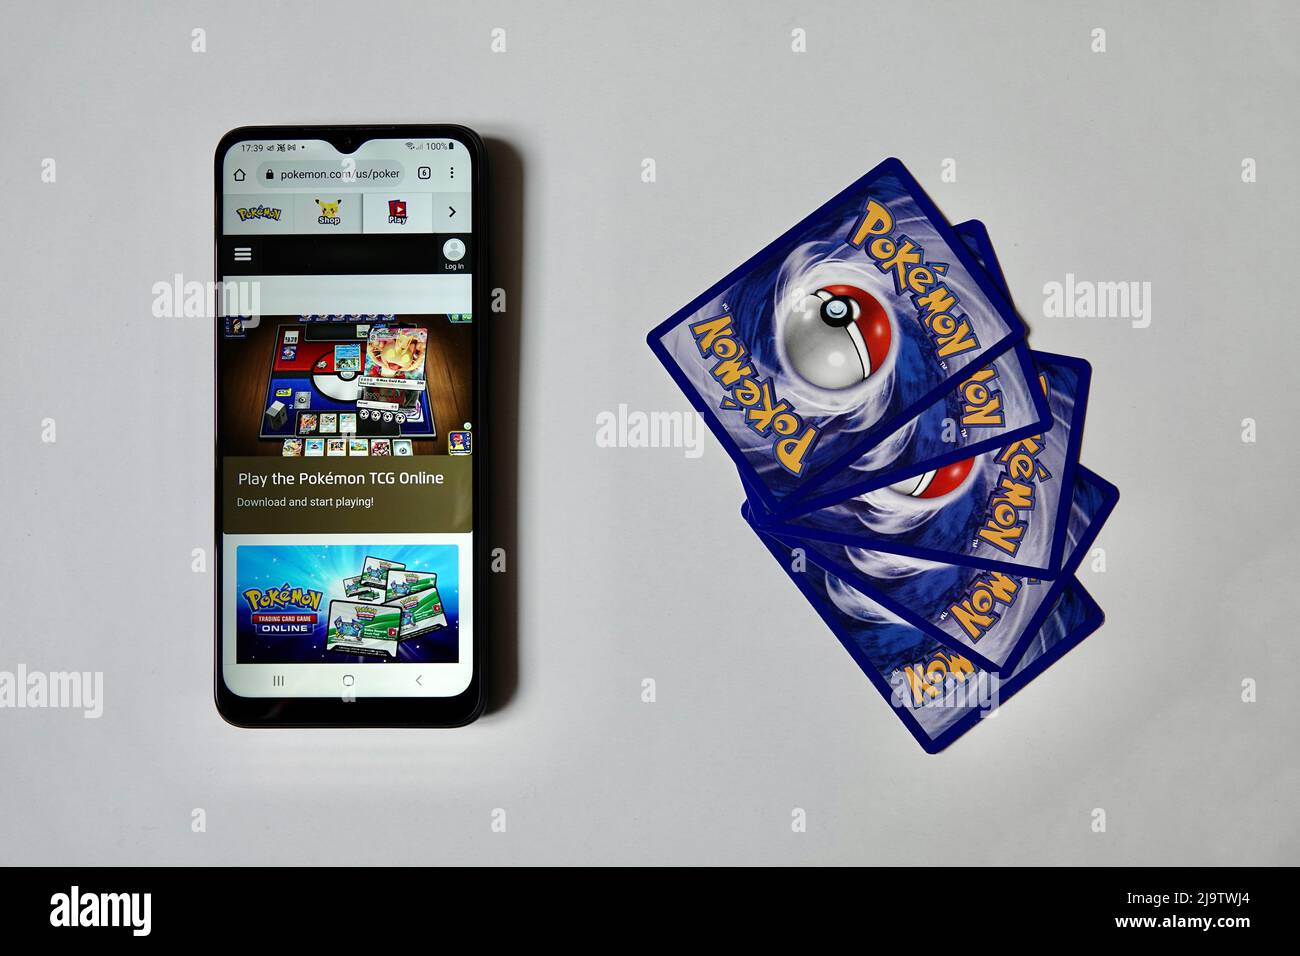 Prague, Czech Republic - April 3 2022: Back side of Pokemon cards and smartphone smart phone with open online version of Pokemon Trading Card Game. Stock Photo